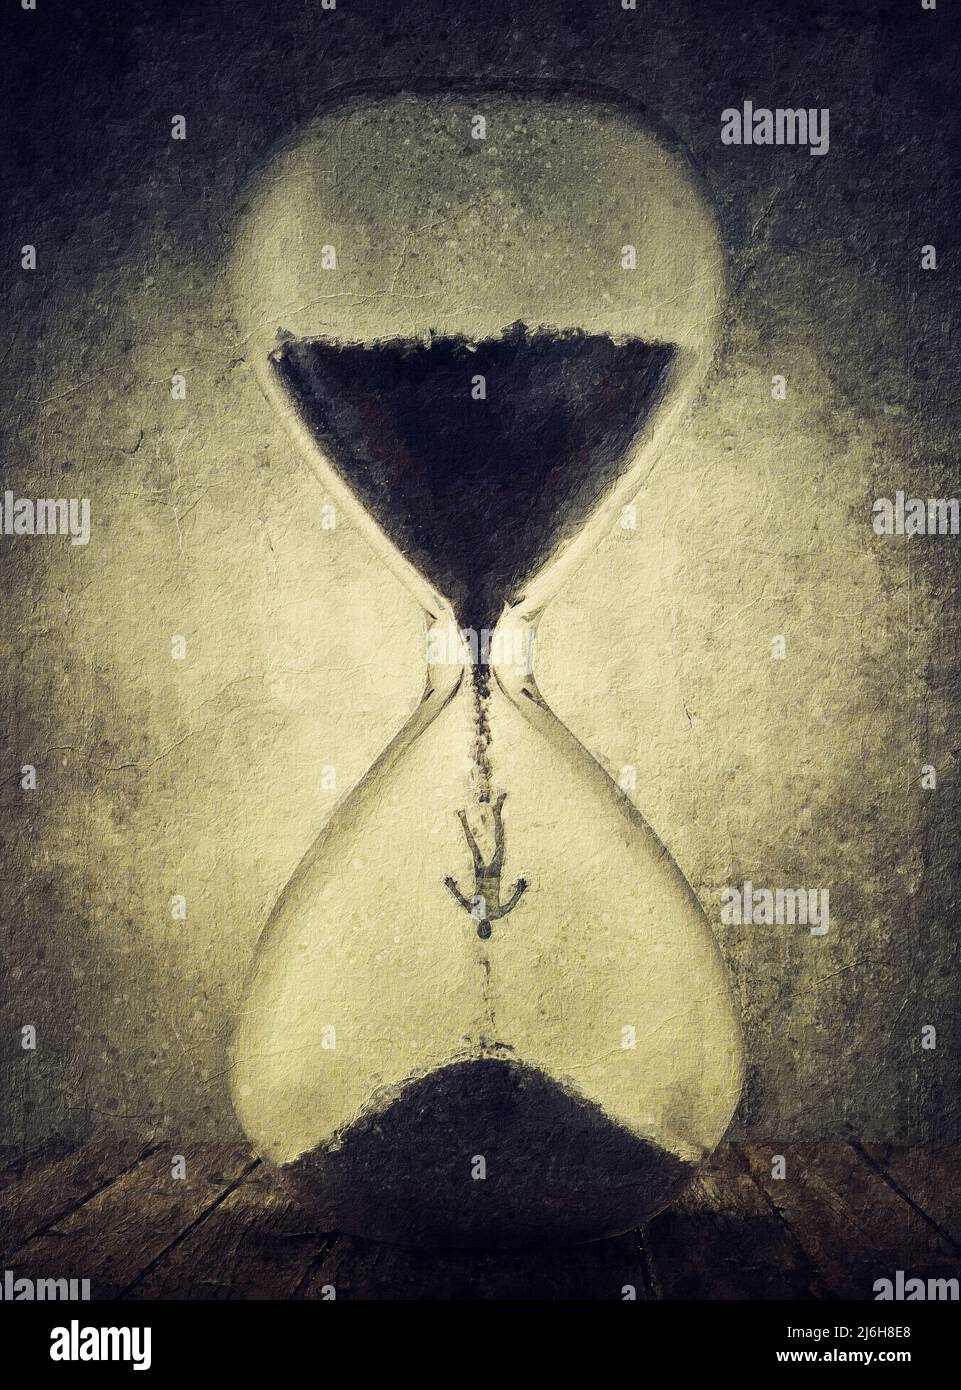 Irreversible time passing concept. Surreal painting with a tiny person falling among the sand inside hourglass. Human dependence of clocks and deadlin Stock Photo